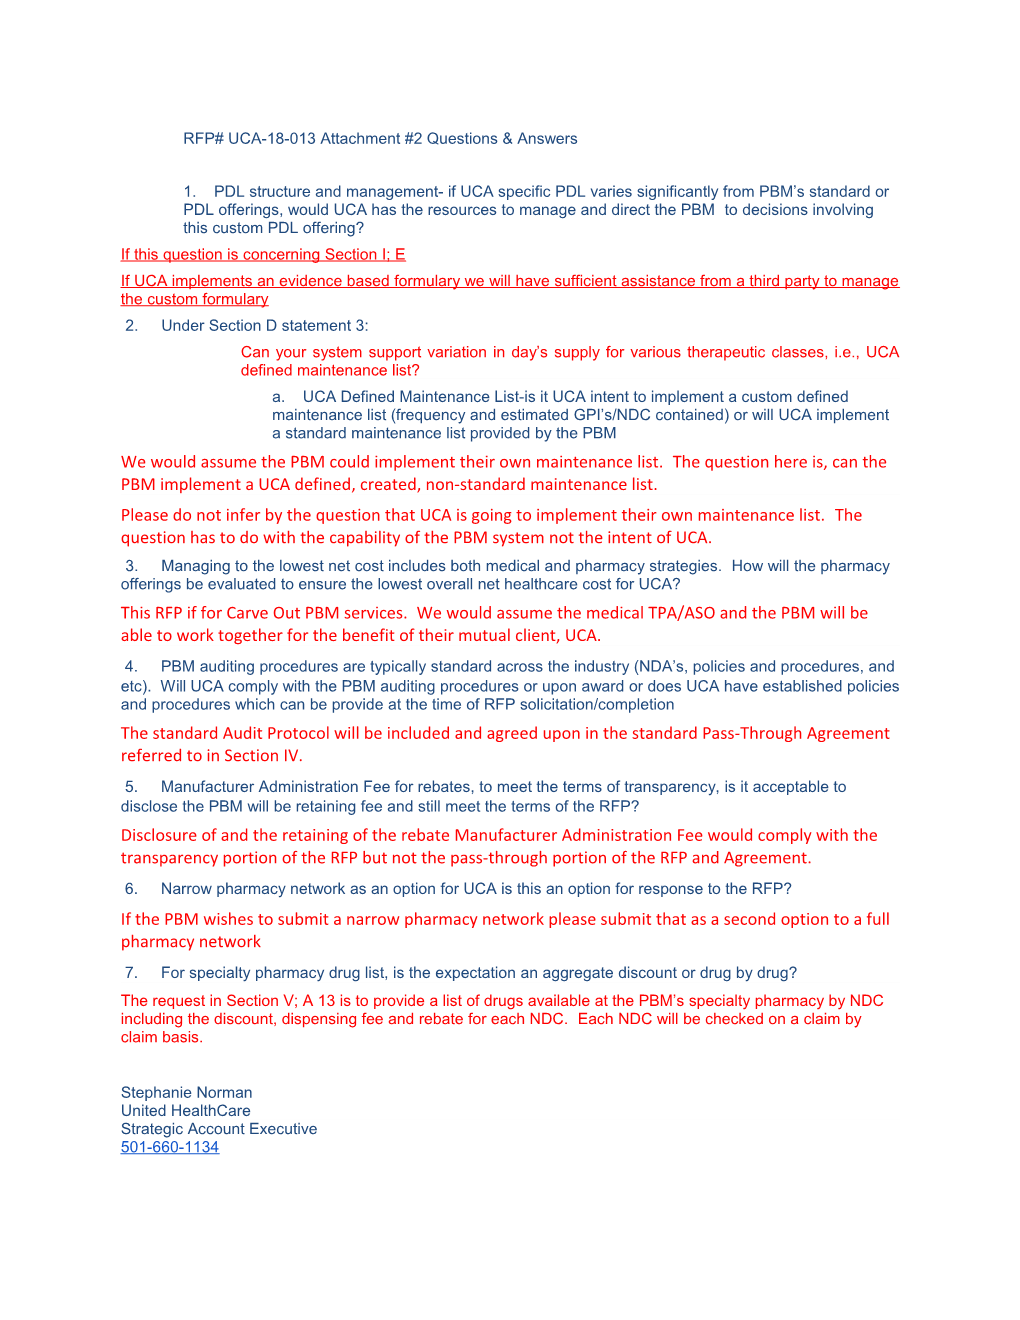 RFP# UCA-18-013 Attachment #2 Questions & Answers